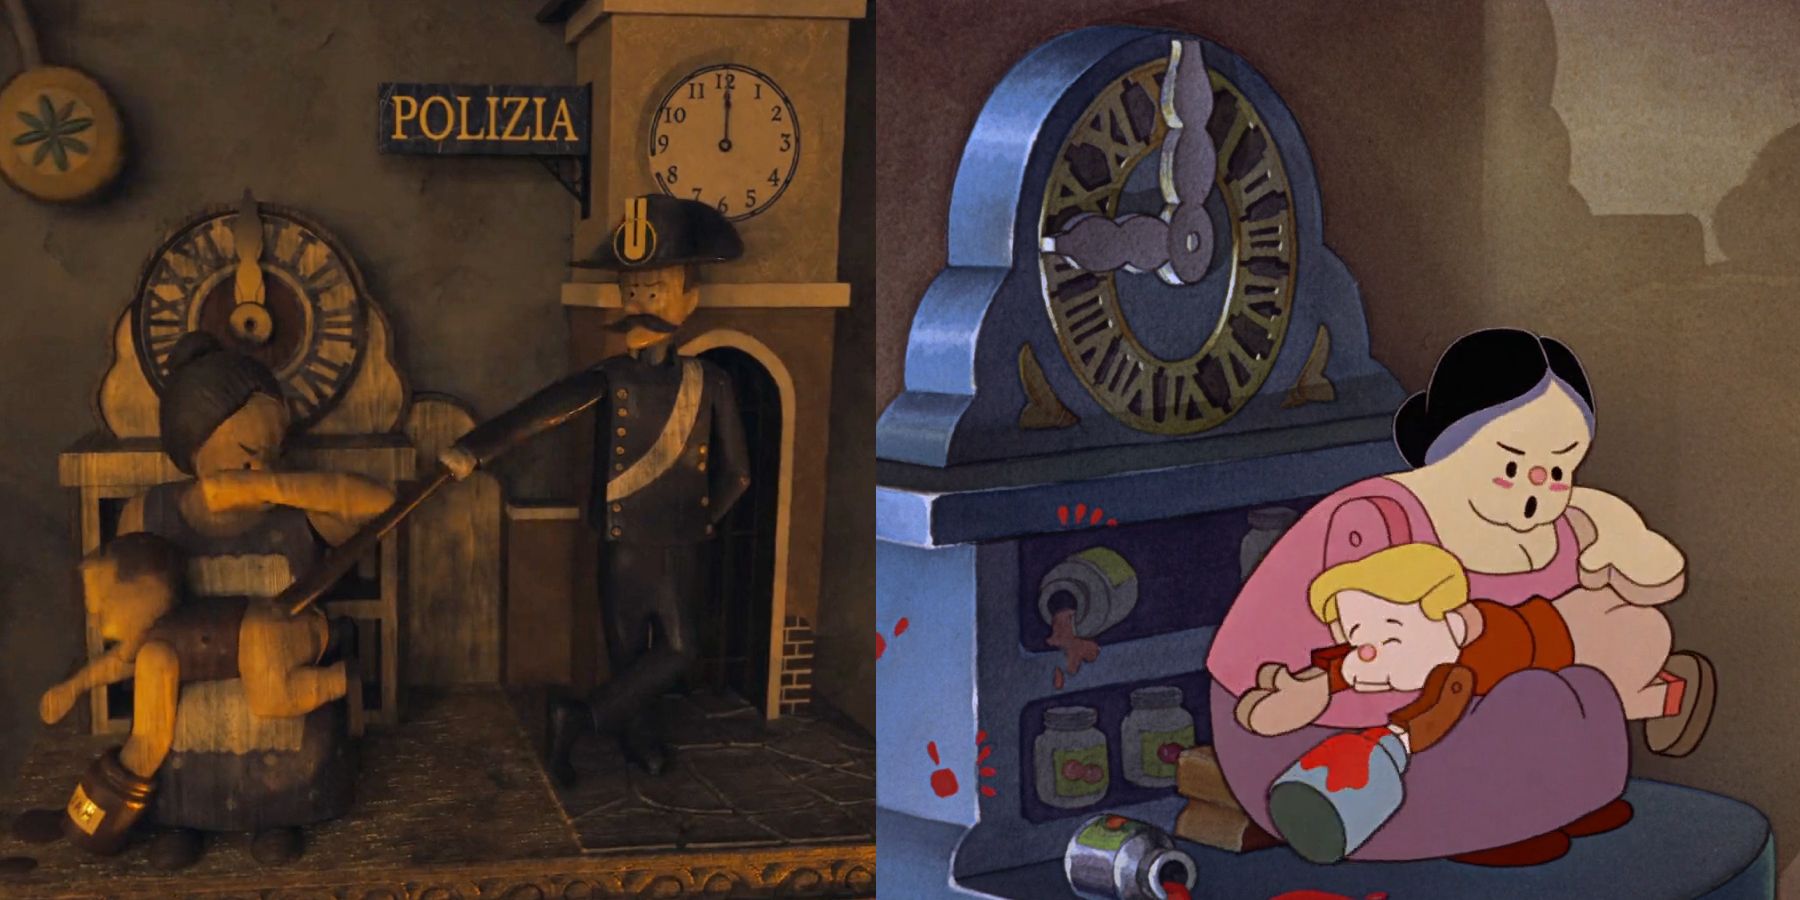 Controversial cuckoo clock changed in Pinocchio remake